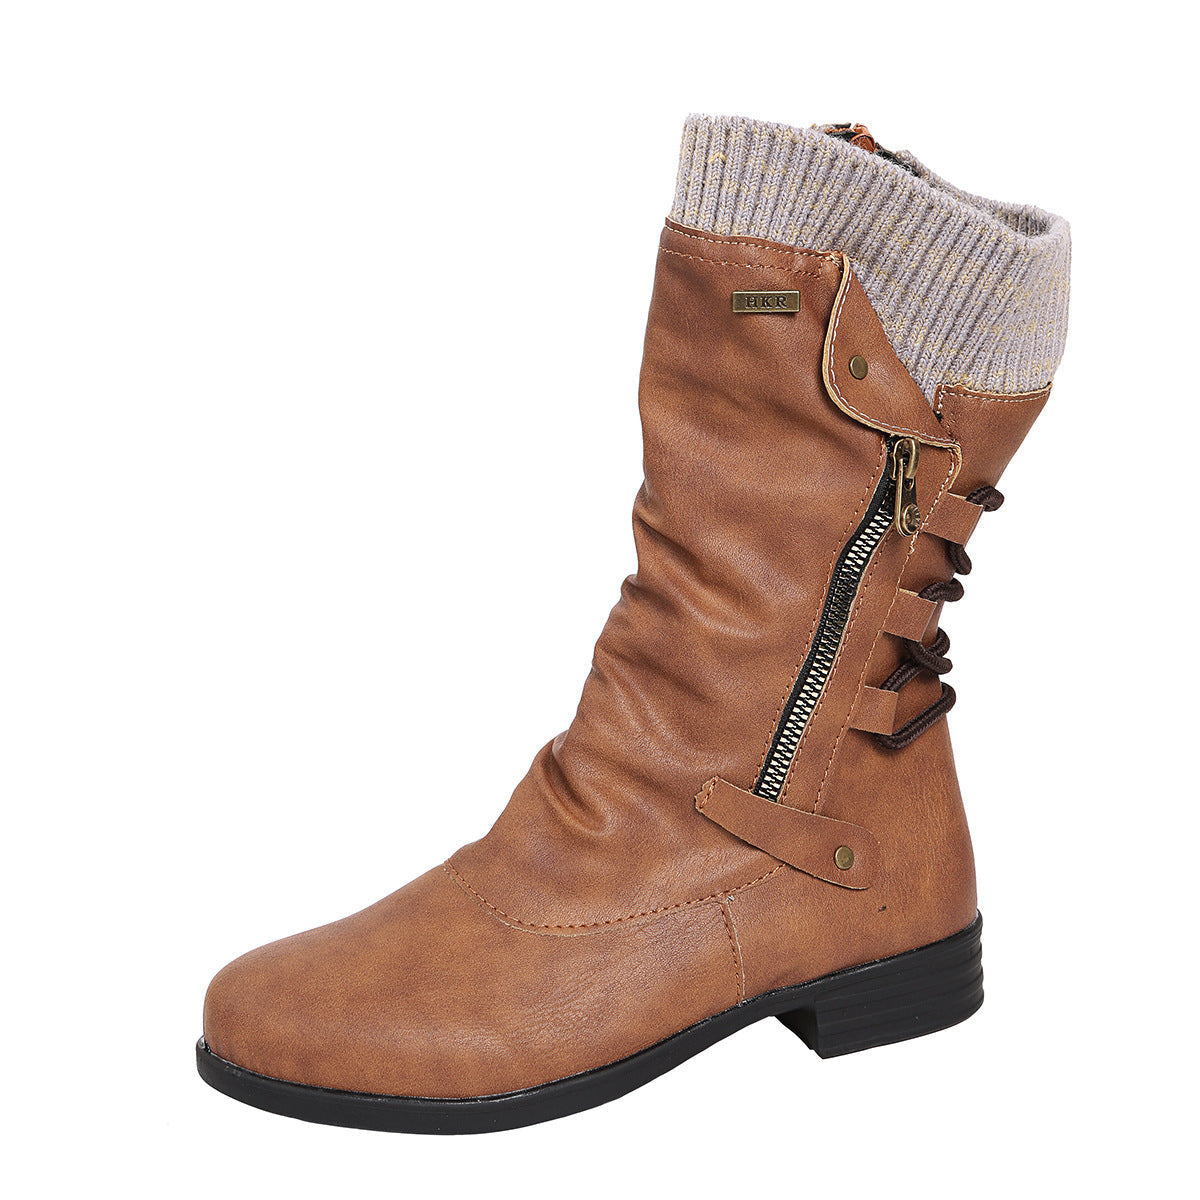 Women's Lace-Up Panel Leather Zip-Up Boots